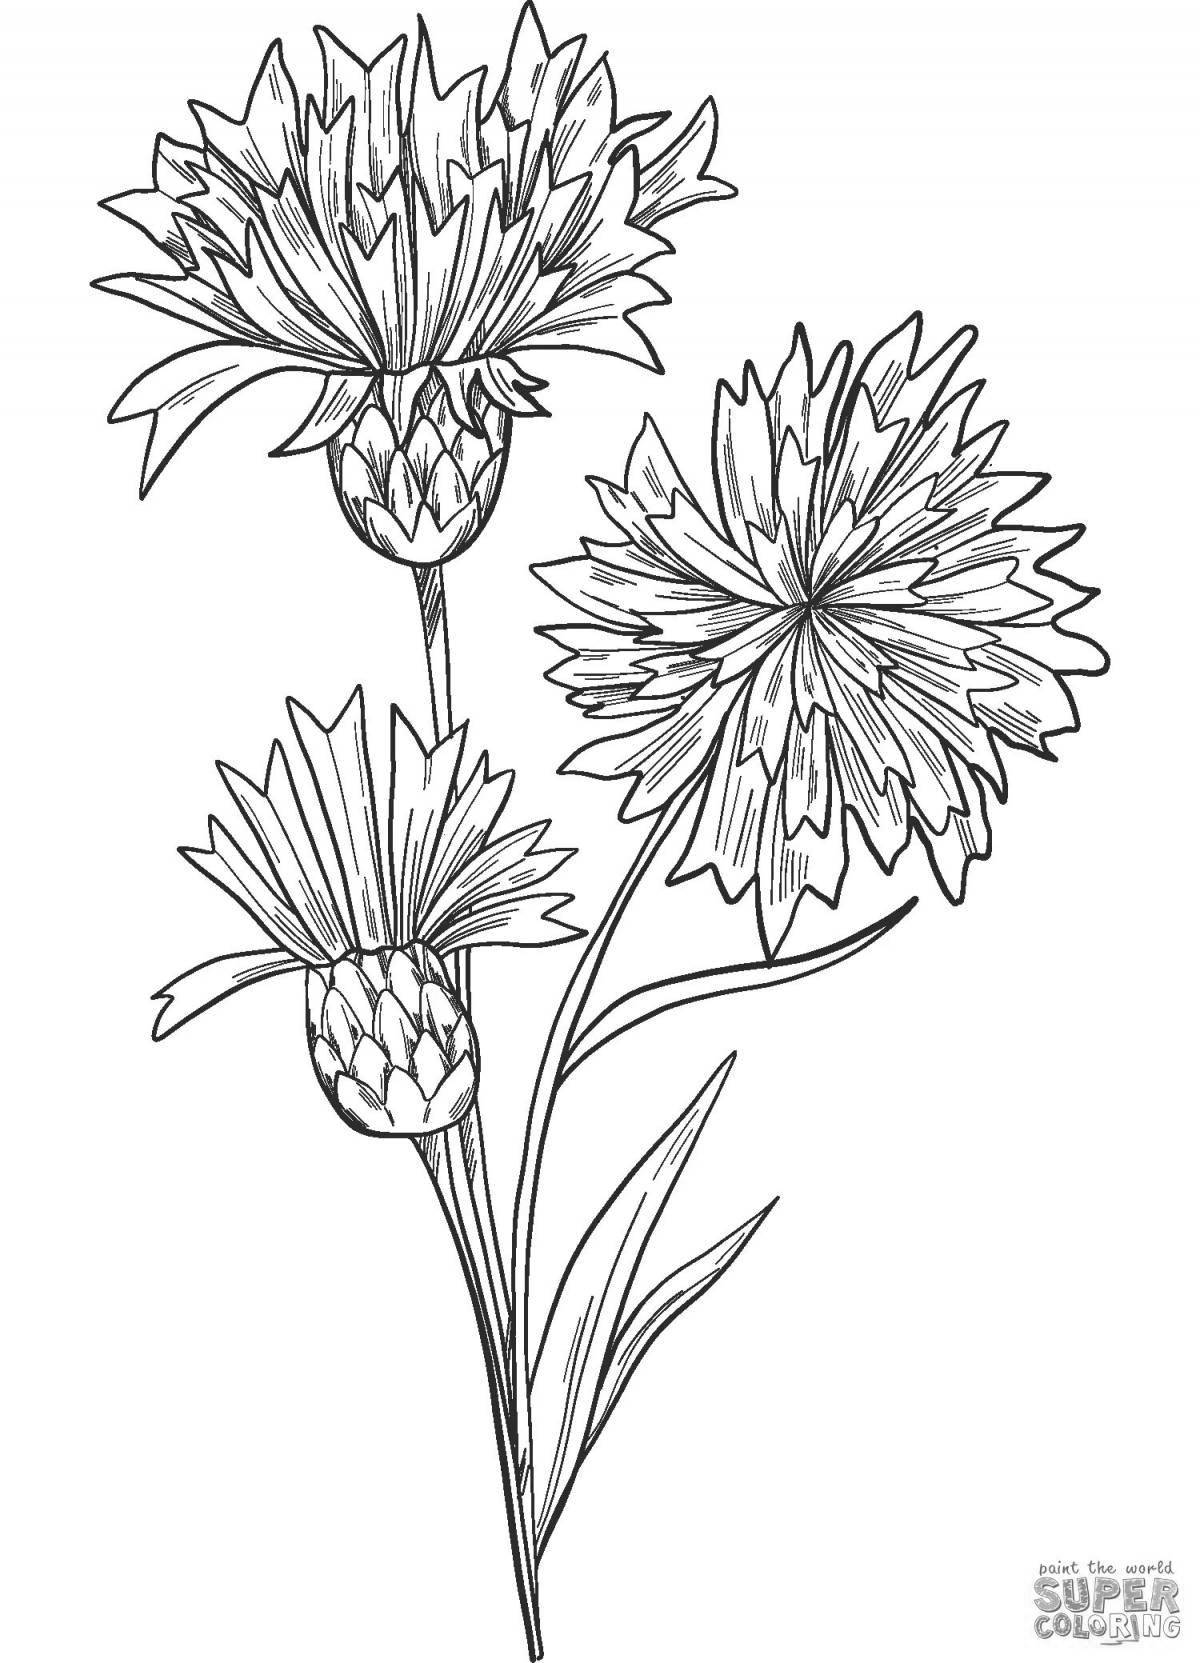 Bright coloring cornflower for the little ones